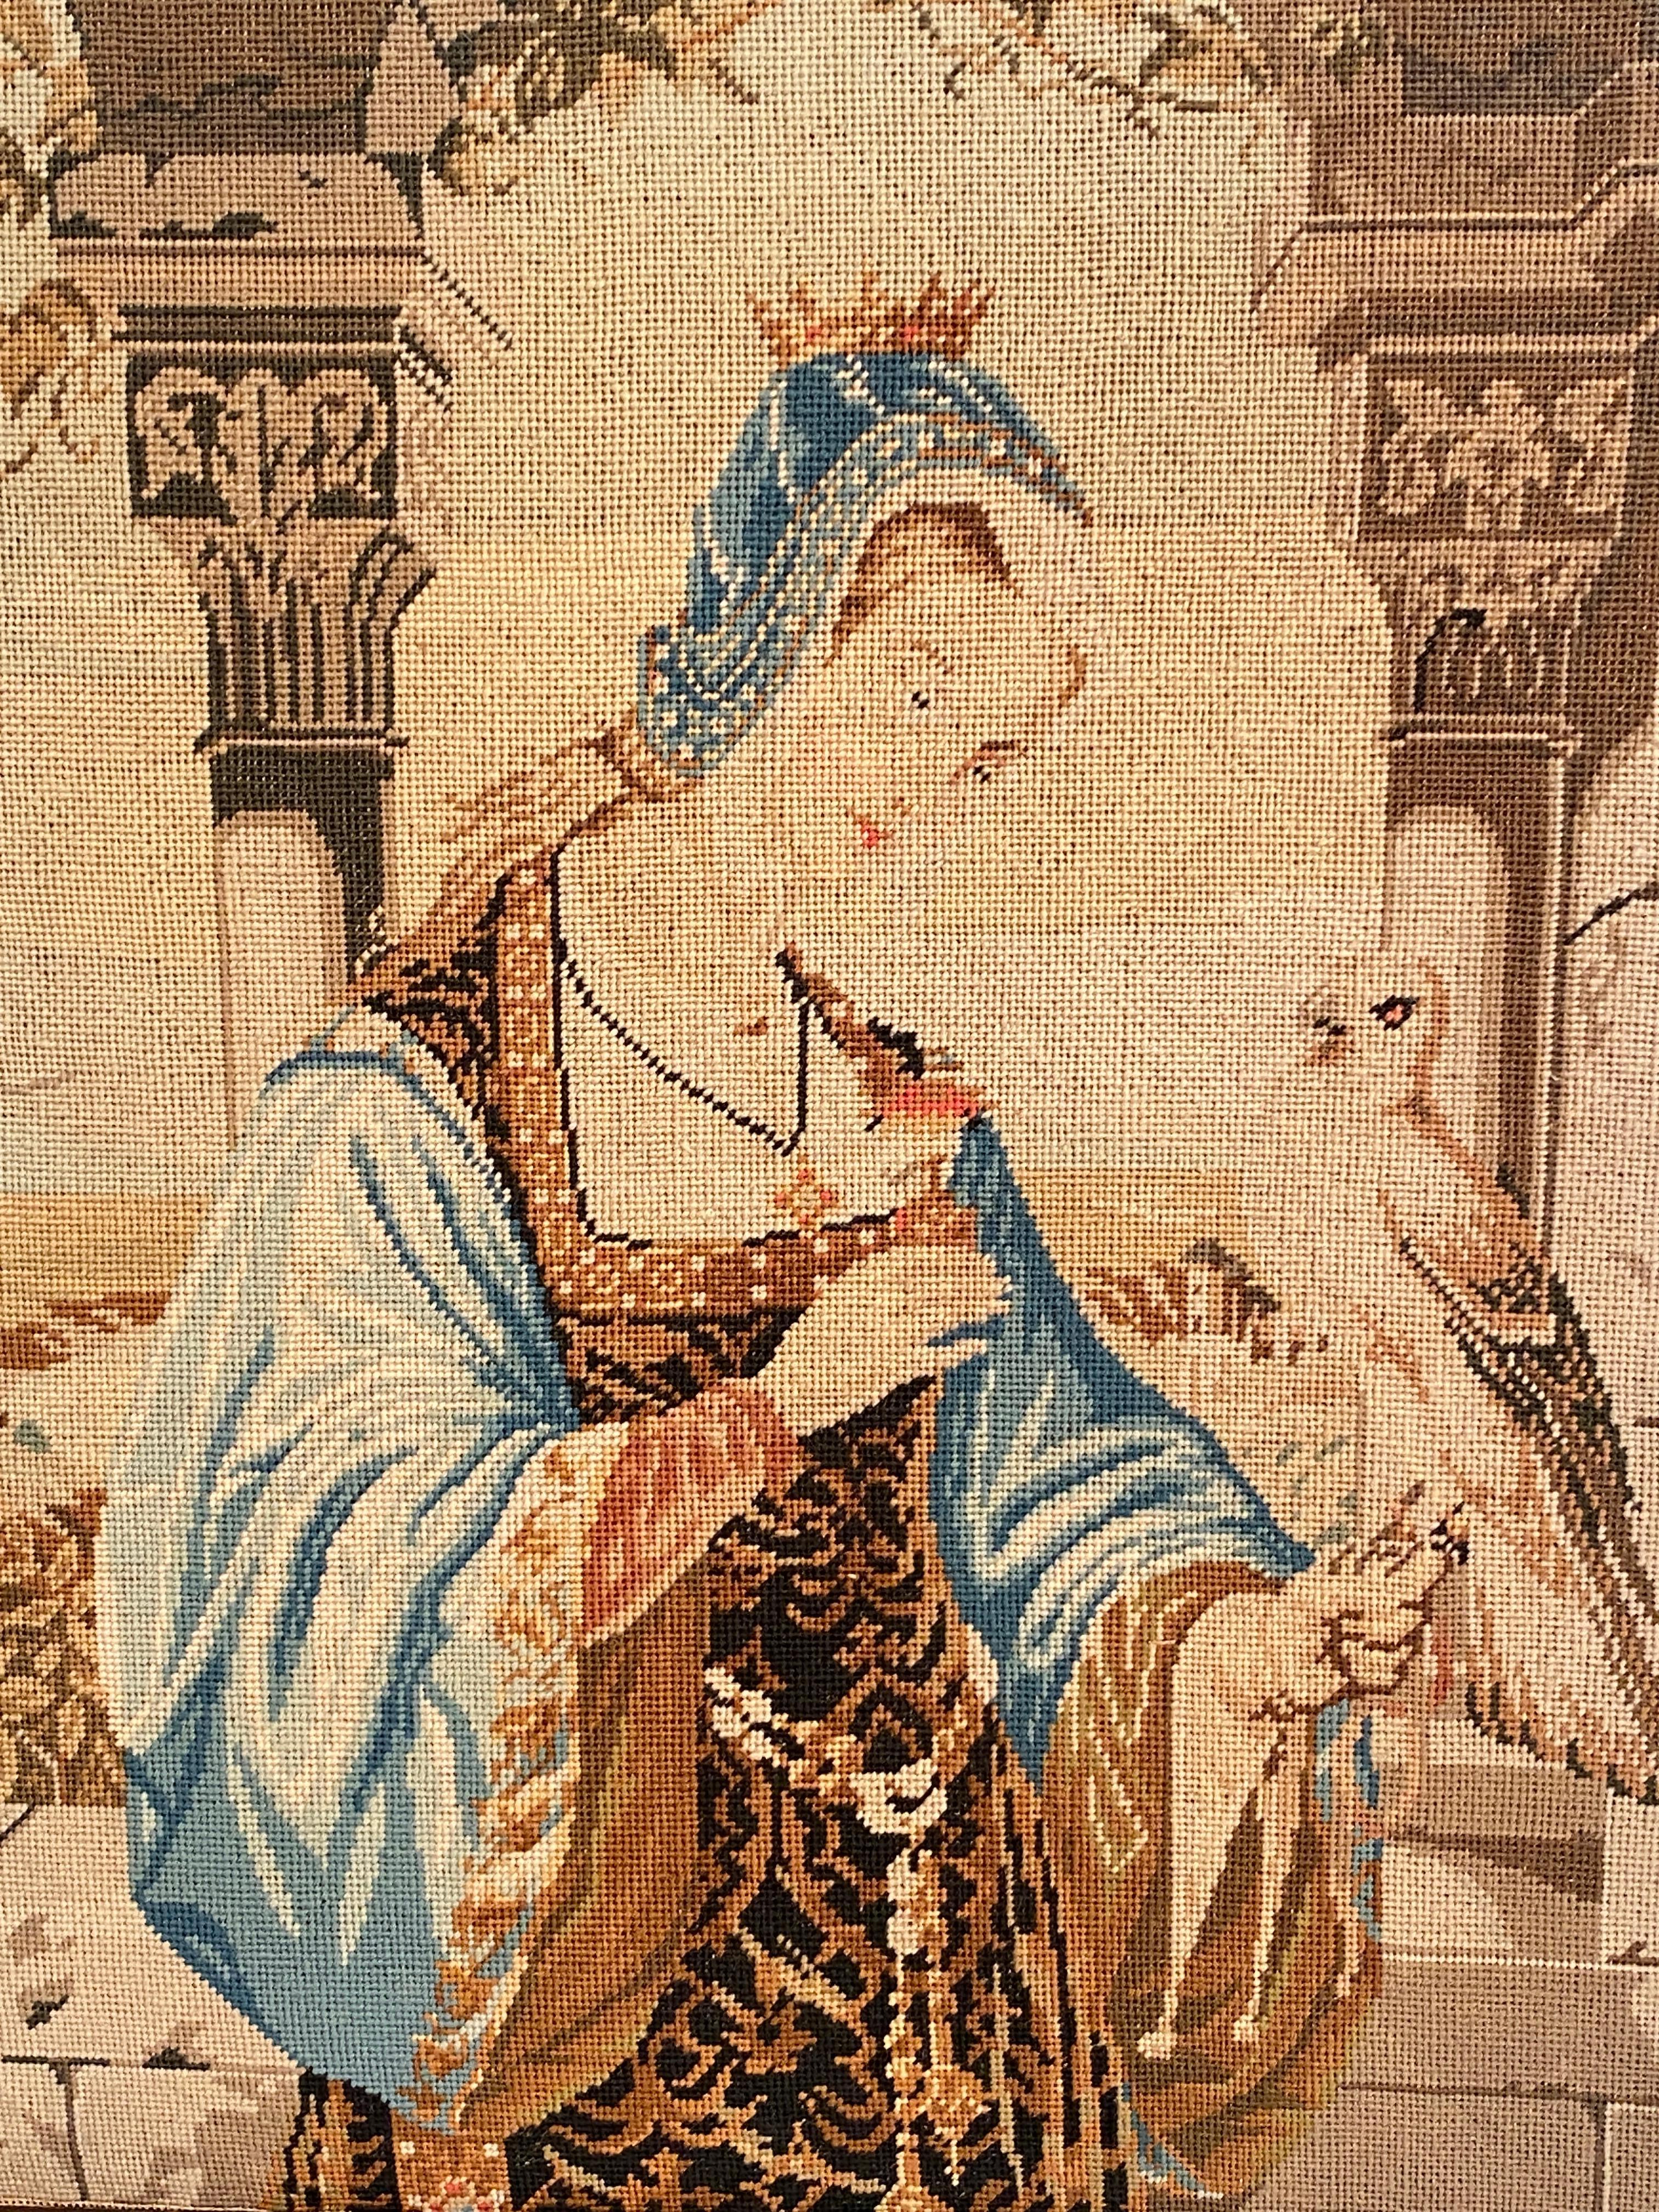 Hunting Falconry Embroidered Tapestry Classical Female Portrait Wool, circa 1890

A Berlin wool work picture of a medieval lady with a bird of prey.

Tapestry embroidered gros-point wool picture after a German School painting, depicting a young lady